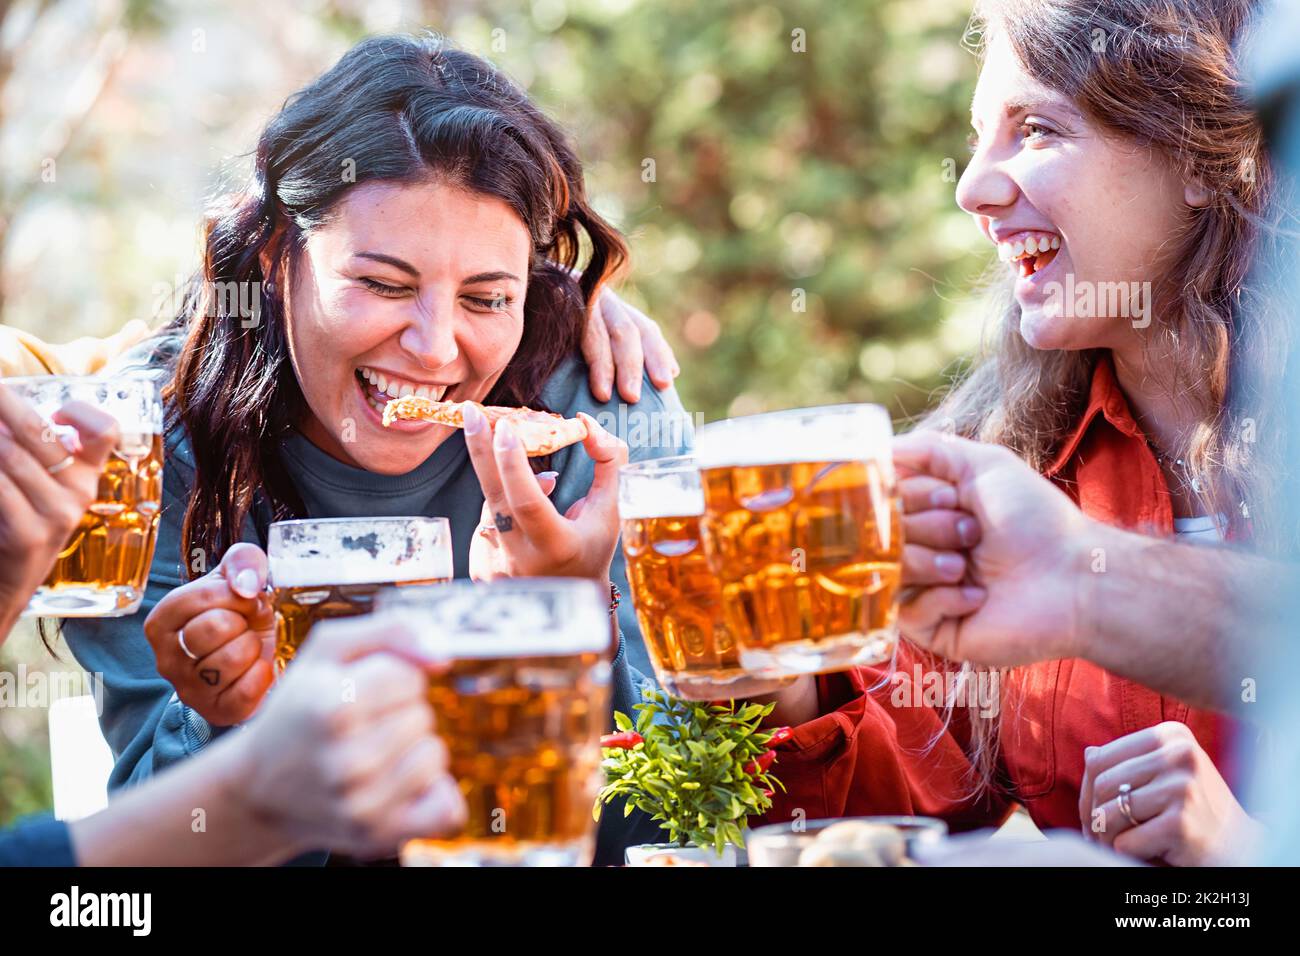 happy friends drinking beers and eating pizza outdoors and laughing together - focus on a young woman biting a slice of pizza - cheerful people, food Stock Photo